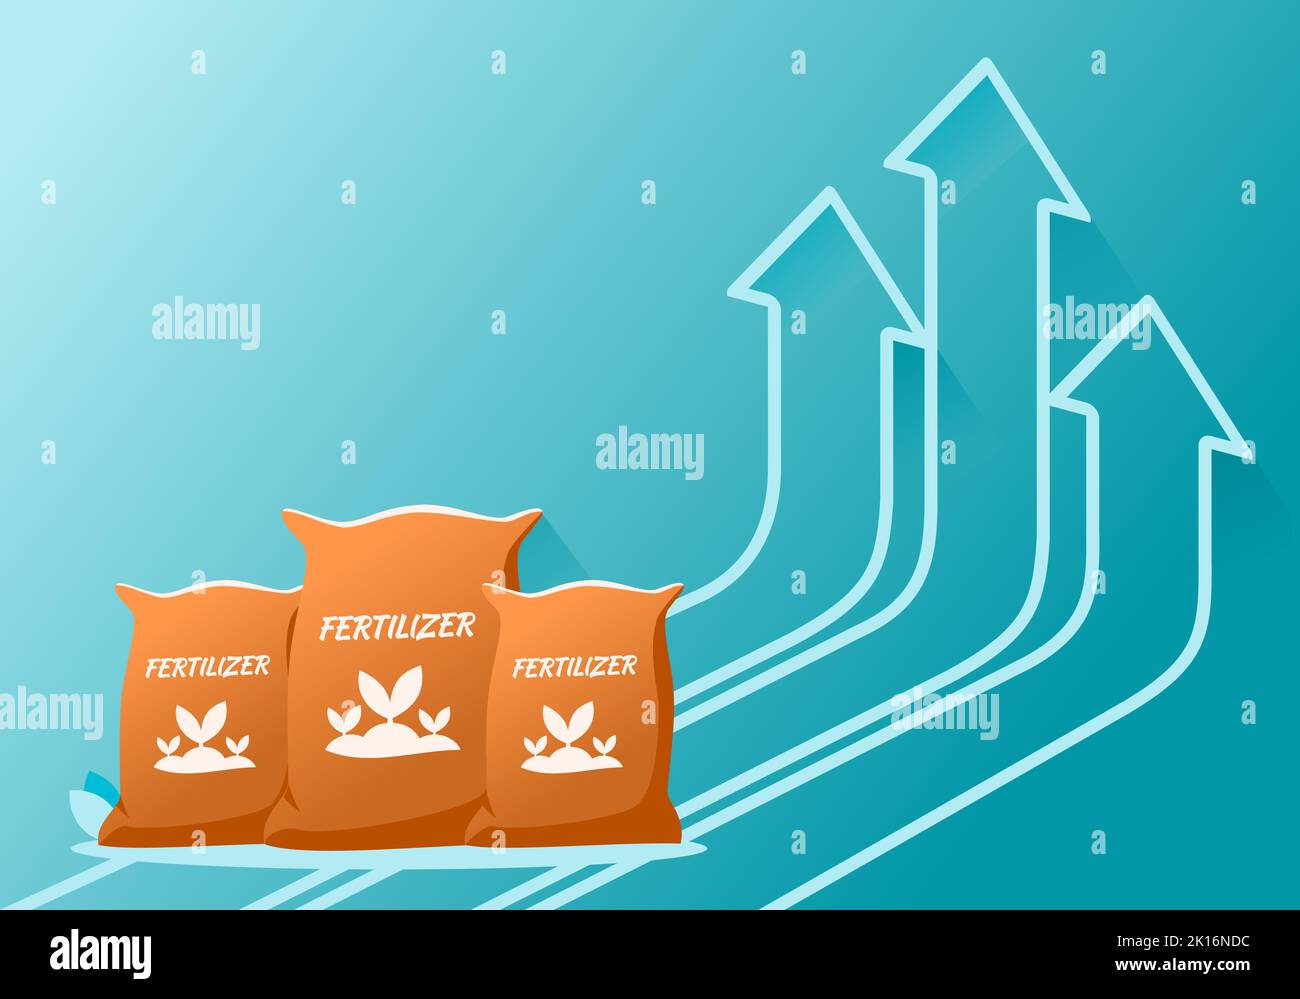 Plant Fertilizer Price or Demand Rise Up Stock Vector